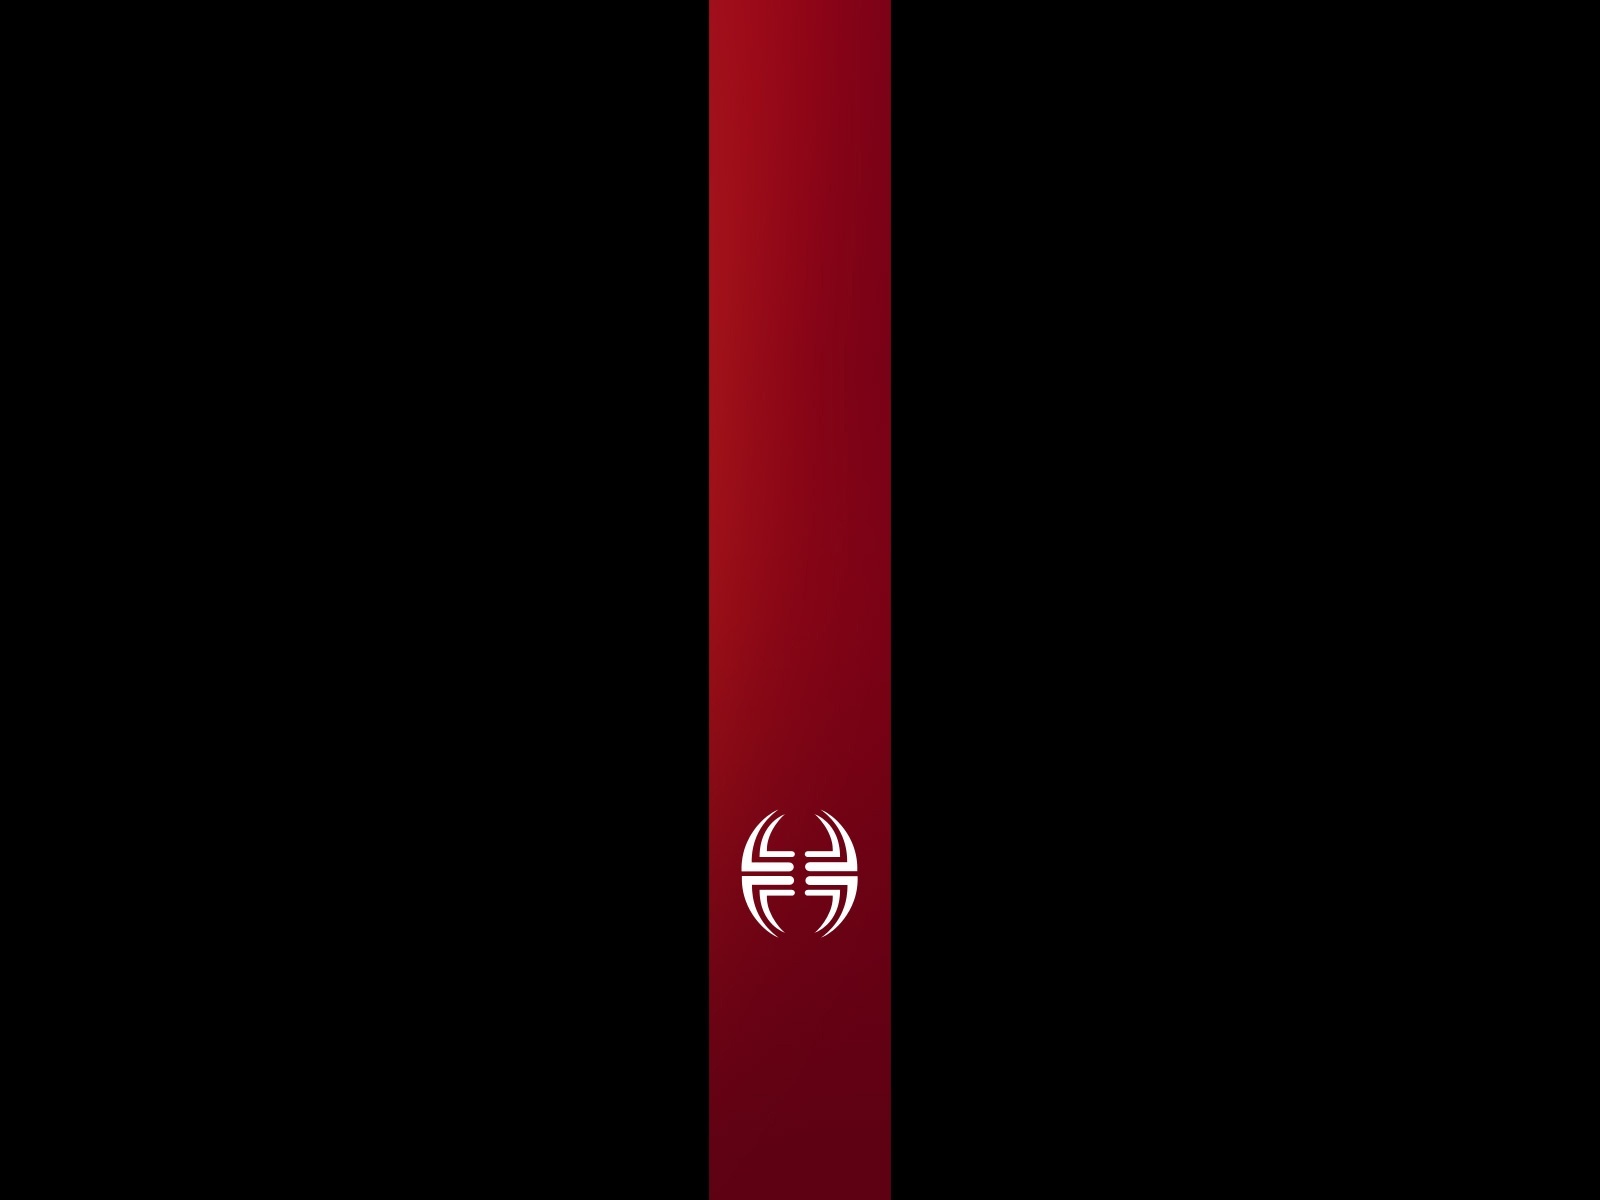 Red Line Wallpapers